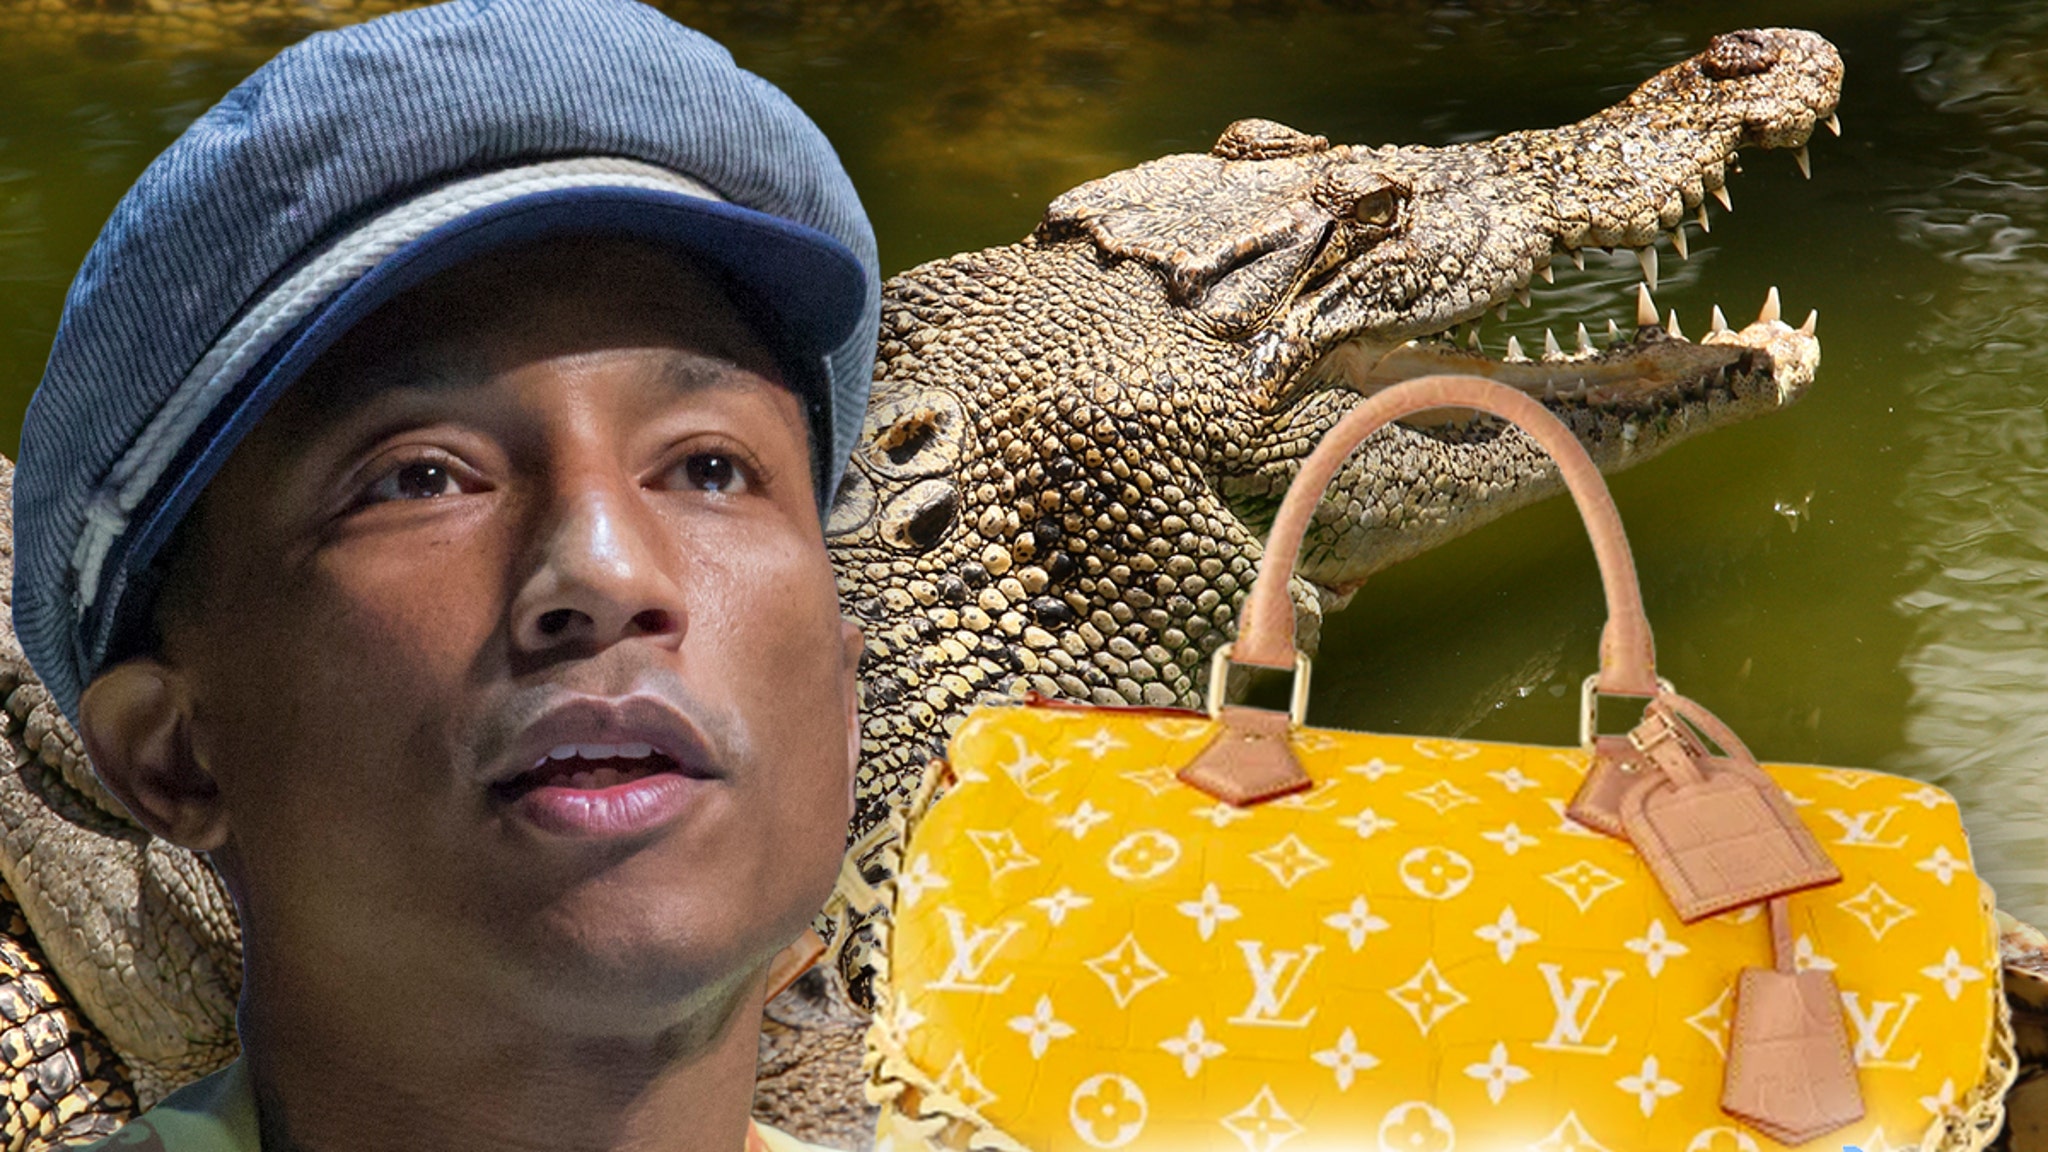 The Louis Vuitton Millionaire Speedy 40 handbag from Pharrell's Spring 24  menswear collection made out of 100% crocodile leather, real…